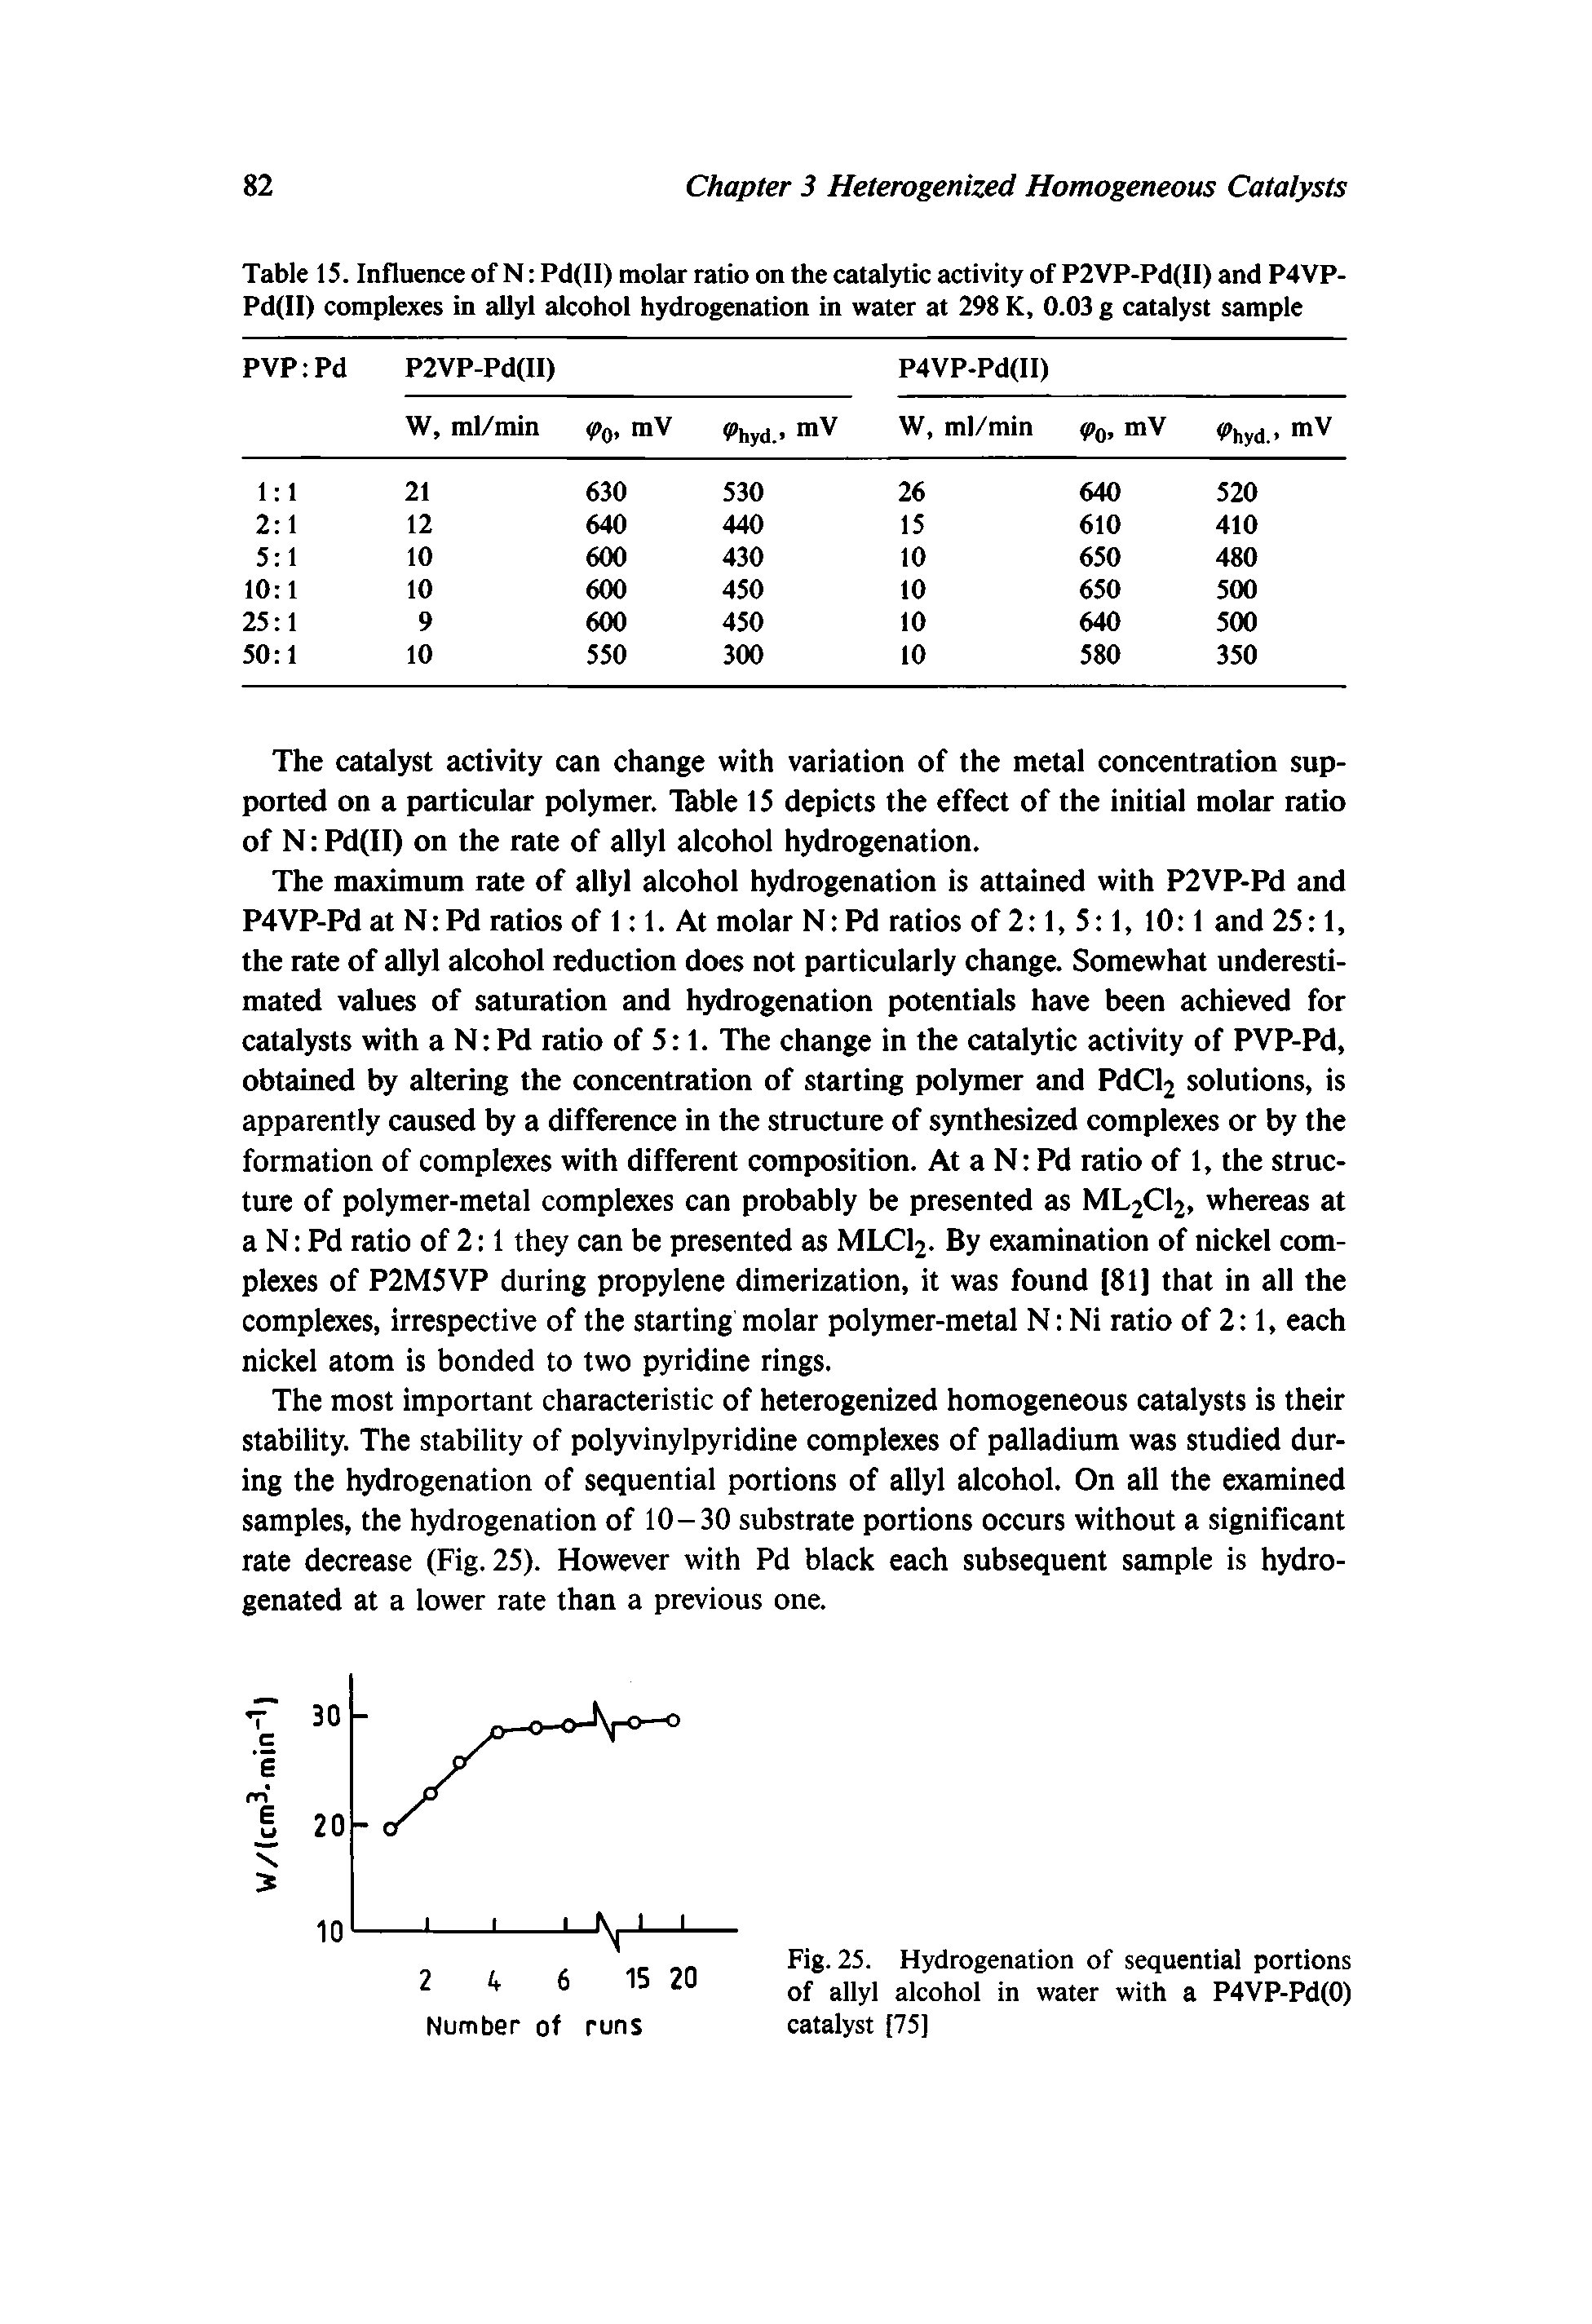 Table 15. Influence of N Pd(ll) molar ratio on the catalytic activity of P2VP-Pd(Il) and P4VP-Pd(II) complexes in allyl alcohol hydrogenation in water at 298 K, 0.03 g catalyst sample...